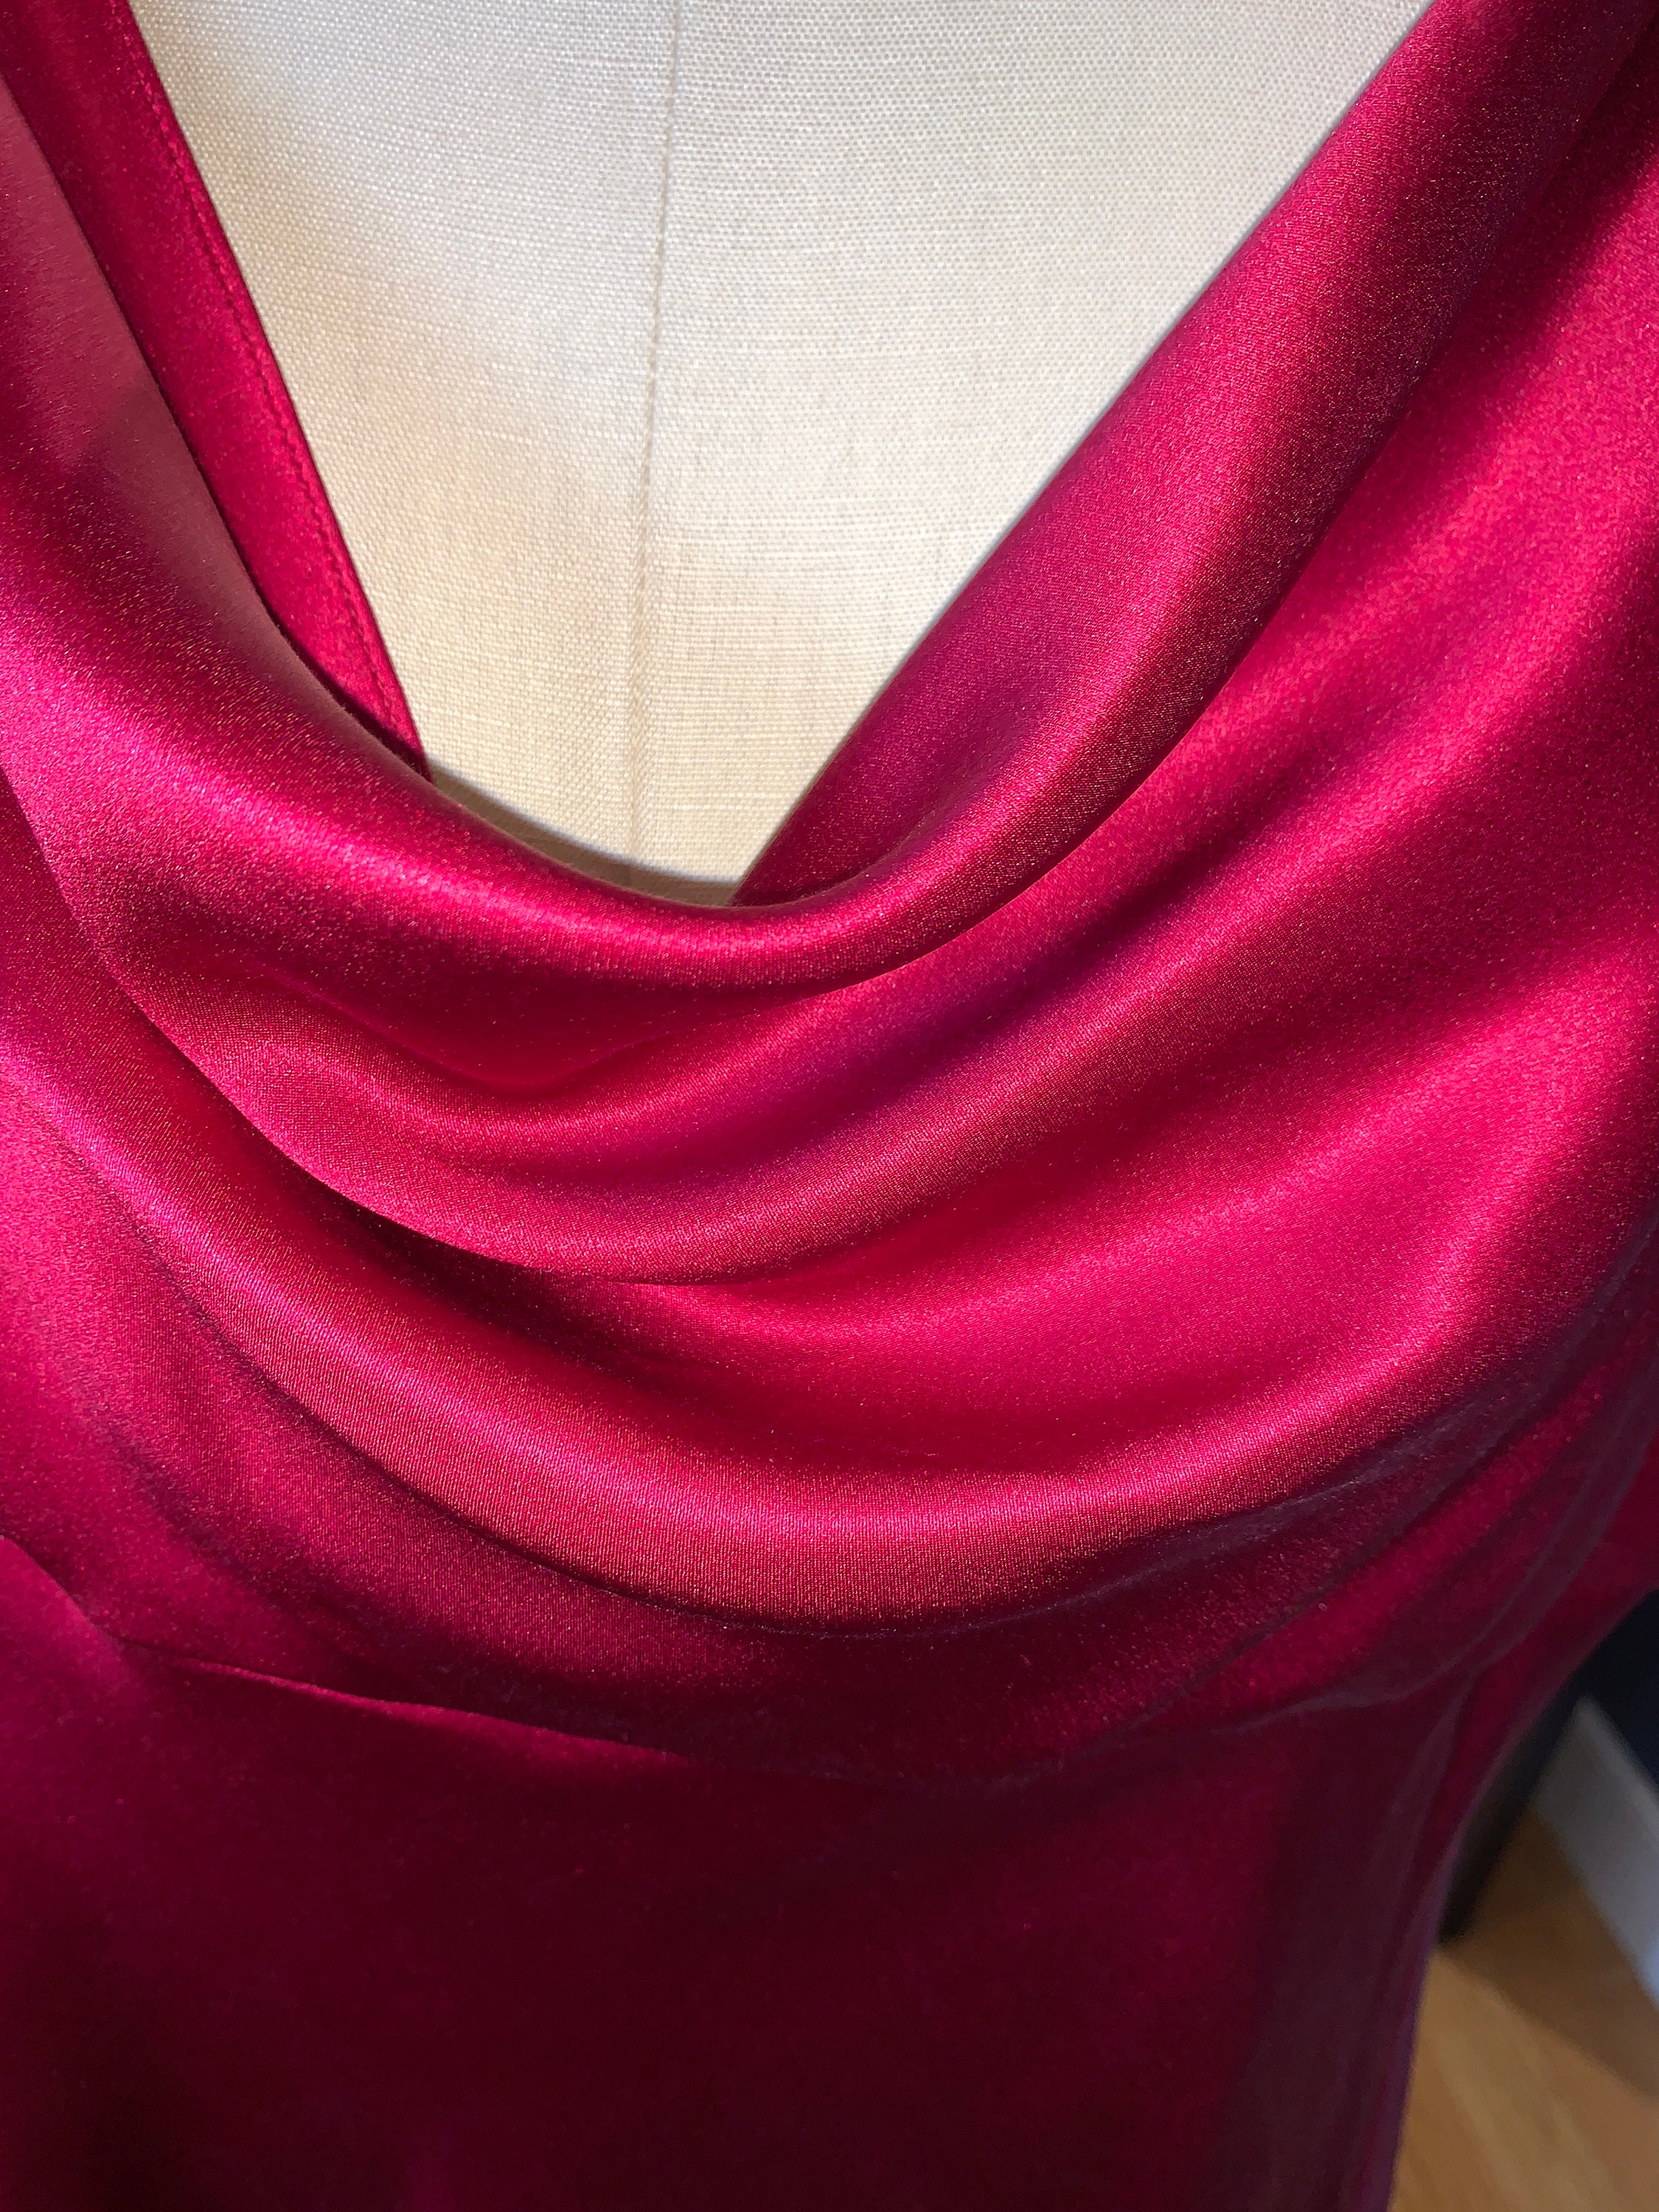 Cherry Red Sexy & Slinky Satin Silk Gown Evening Formal - Etsy UK